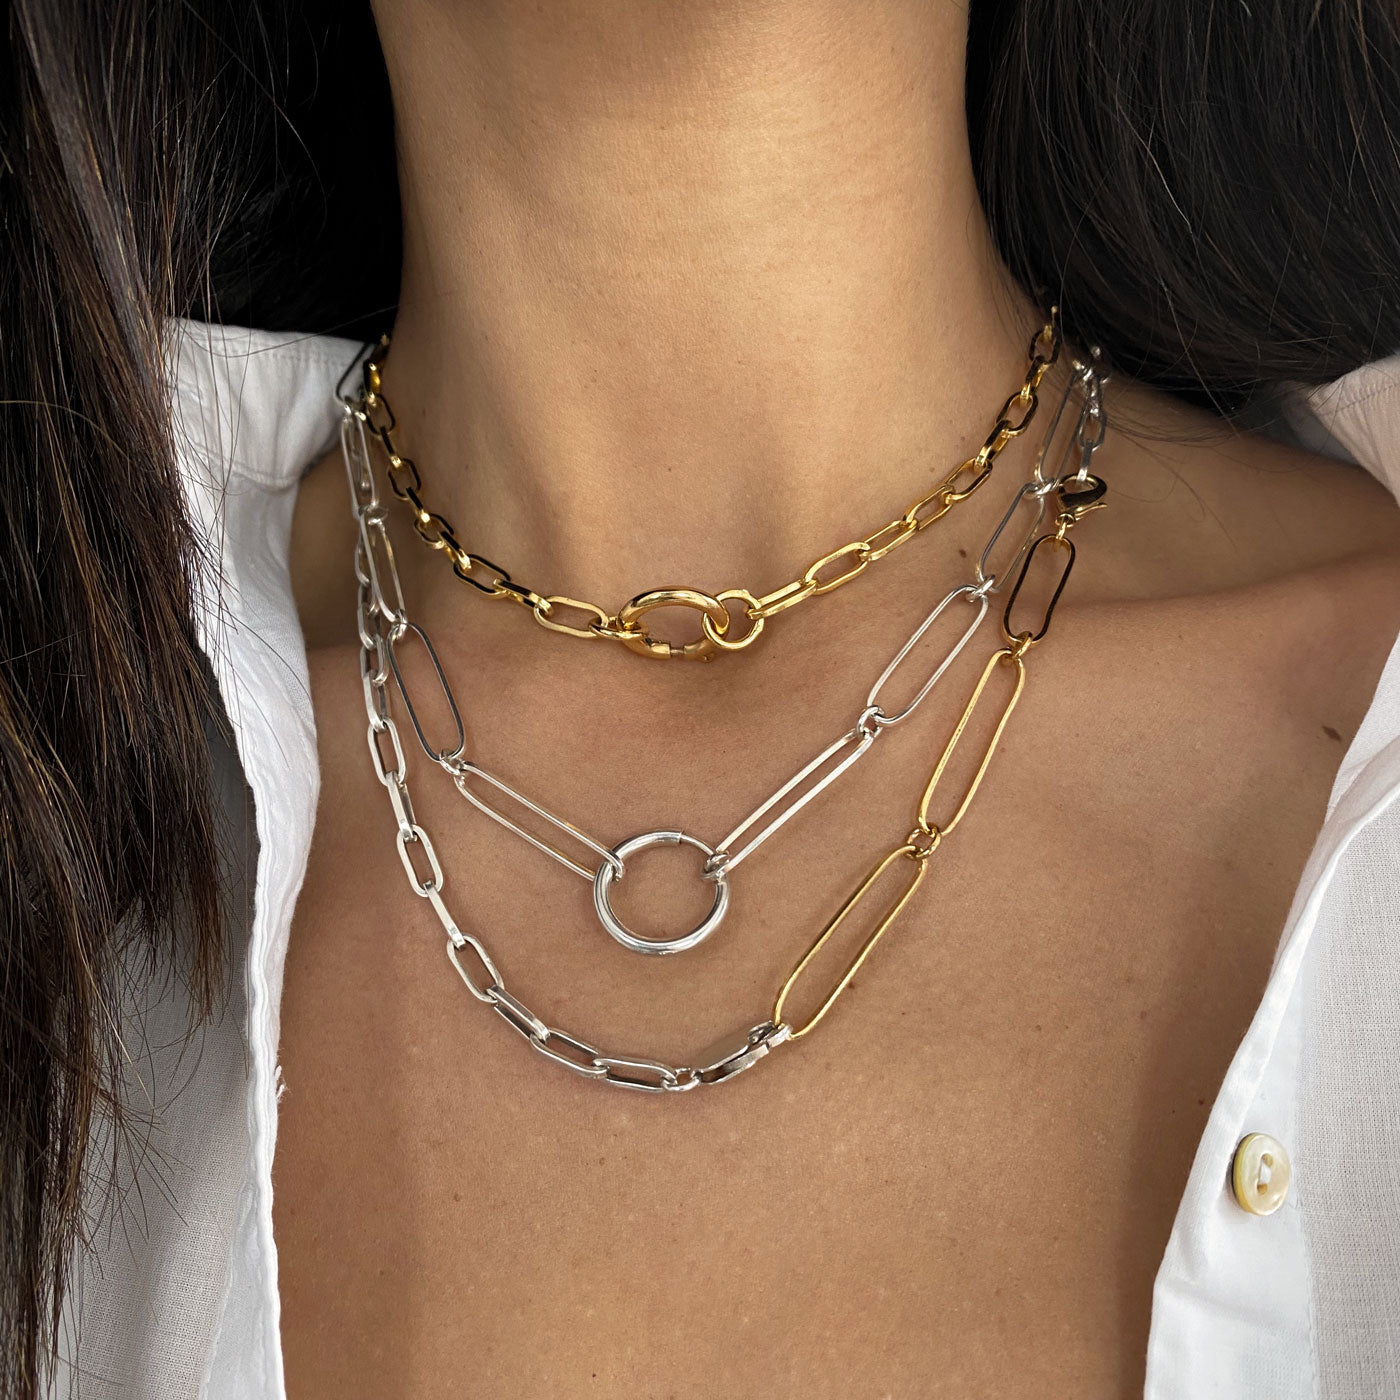 Mystic chain elongated silver 925 links colombian jewelry ana buendia, necklace layering, gold and silver